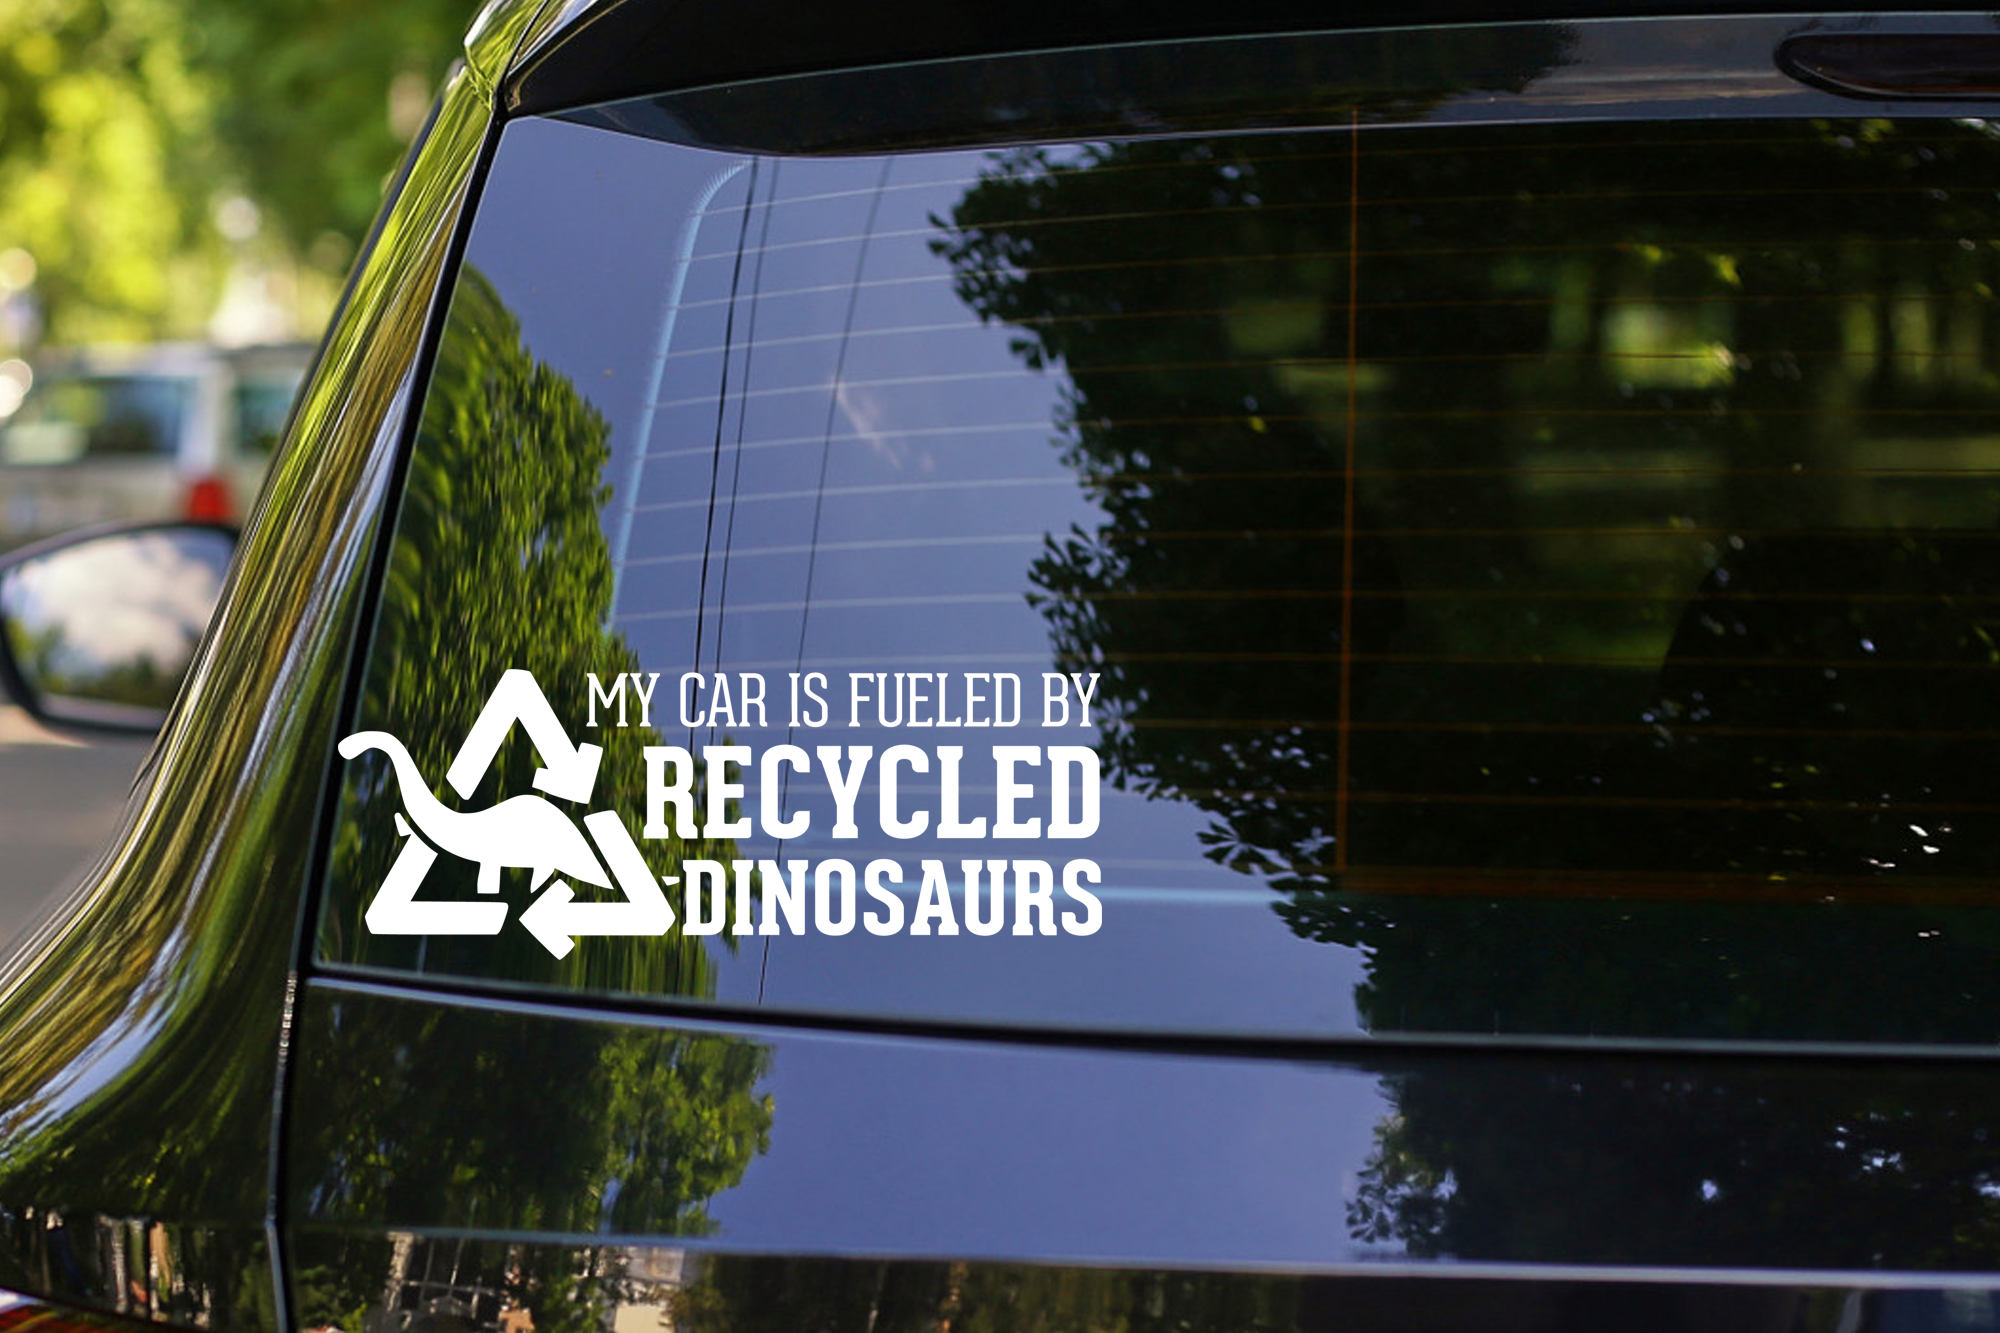 My car is fueled by recycled dinosaurs funny car sticker decal